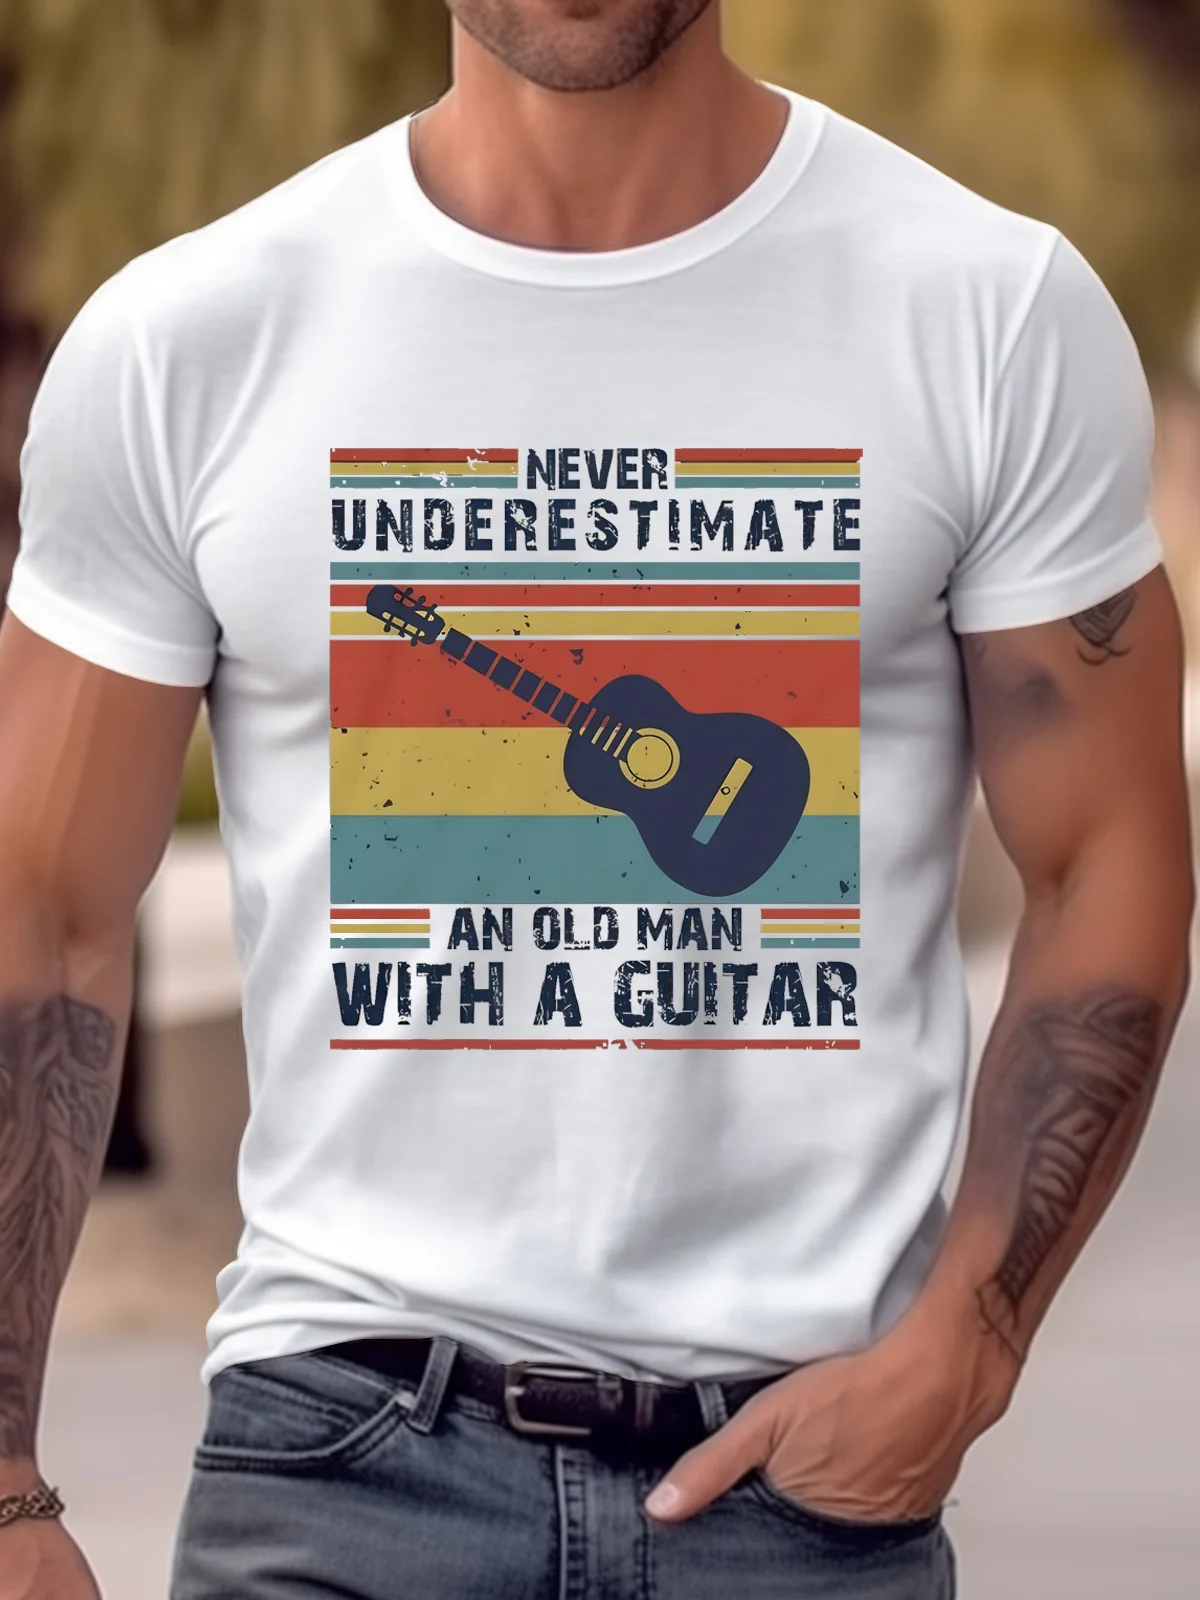 Royaura® Never Underestimate an Old Man With A Guitar T-Shirt Guitarist Dad Gift Guitar Player Vintage Grandpa Tee Big Tall